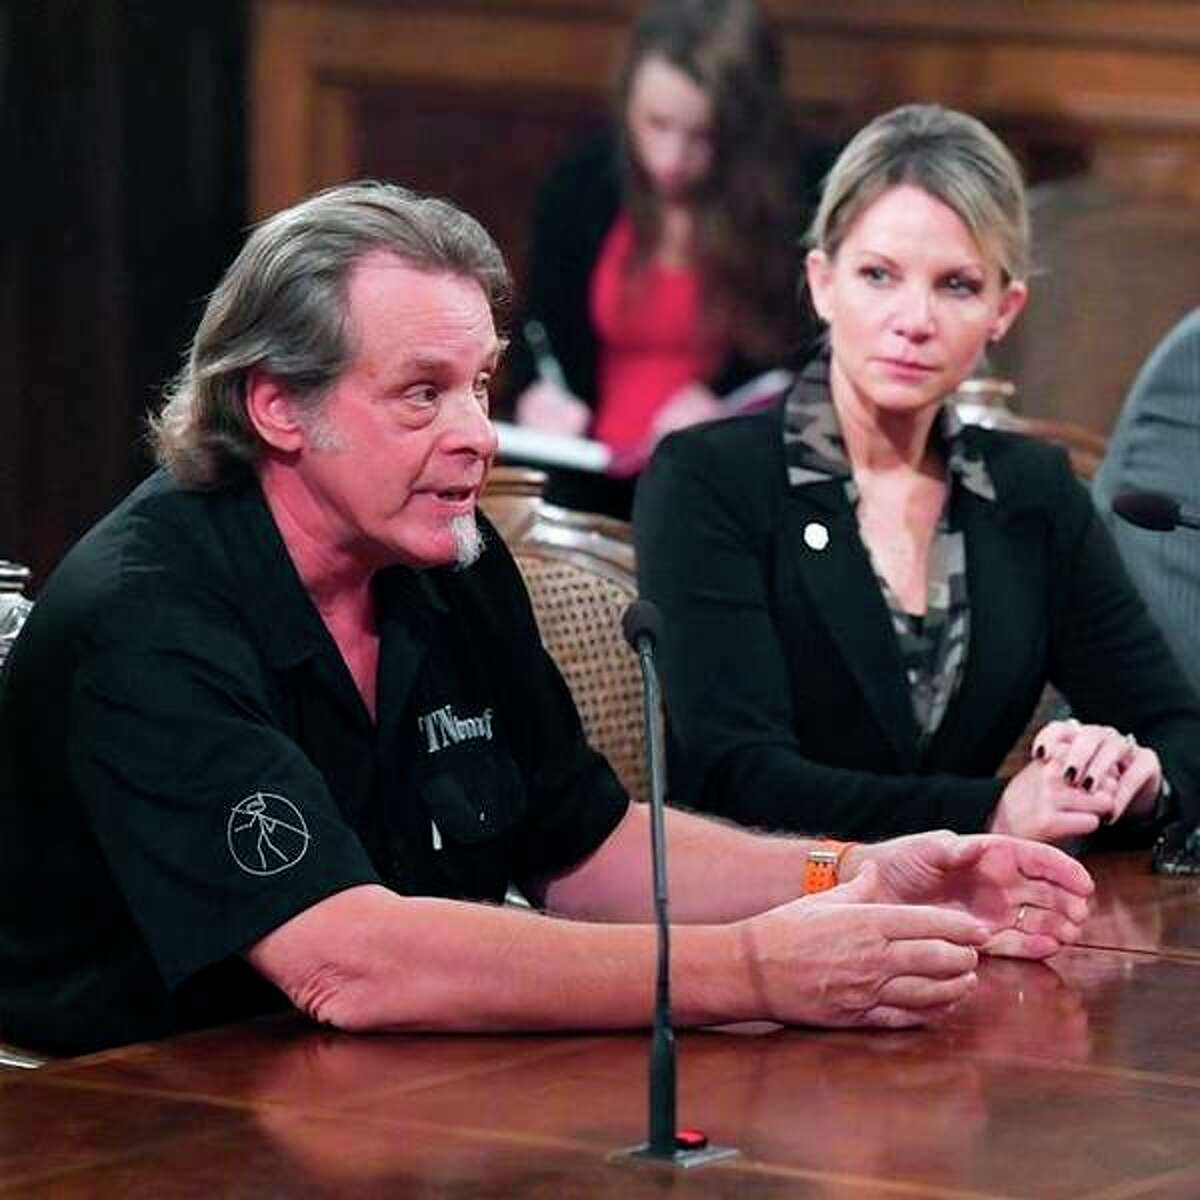 State Rep. Michele Hoitenga, R-Manton, and rocker Ted Nugent, pictured at left, testify Sept. 17 in support of her plan to end the ban on baiting deer in Michigan. (Courtesy photo)